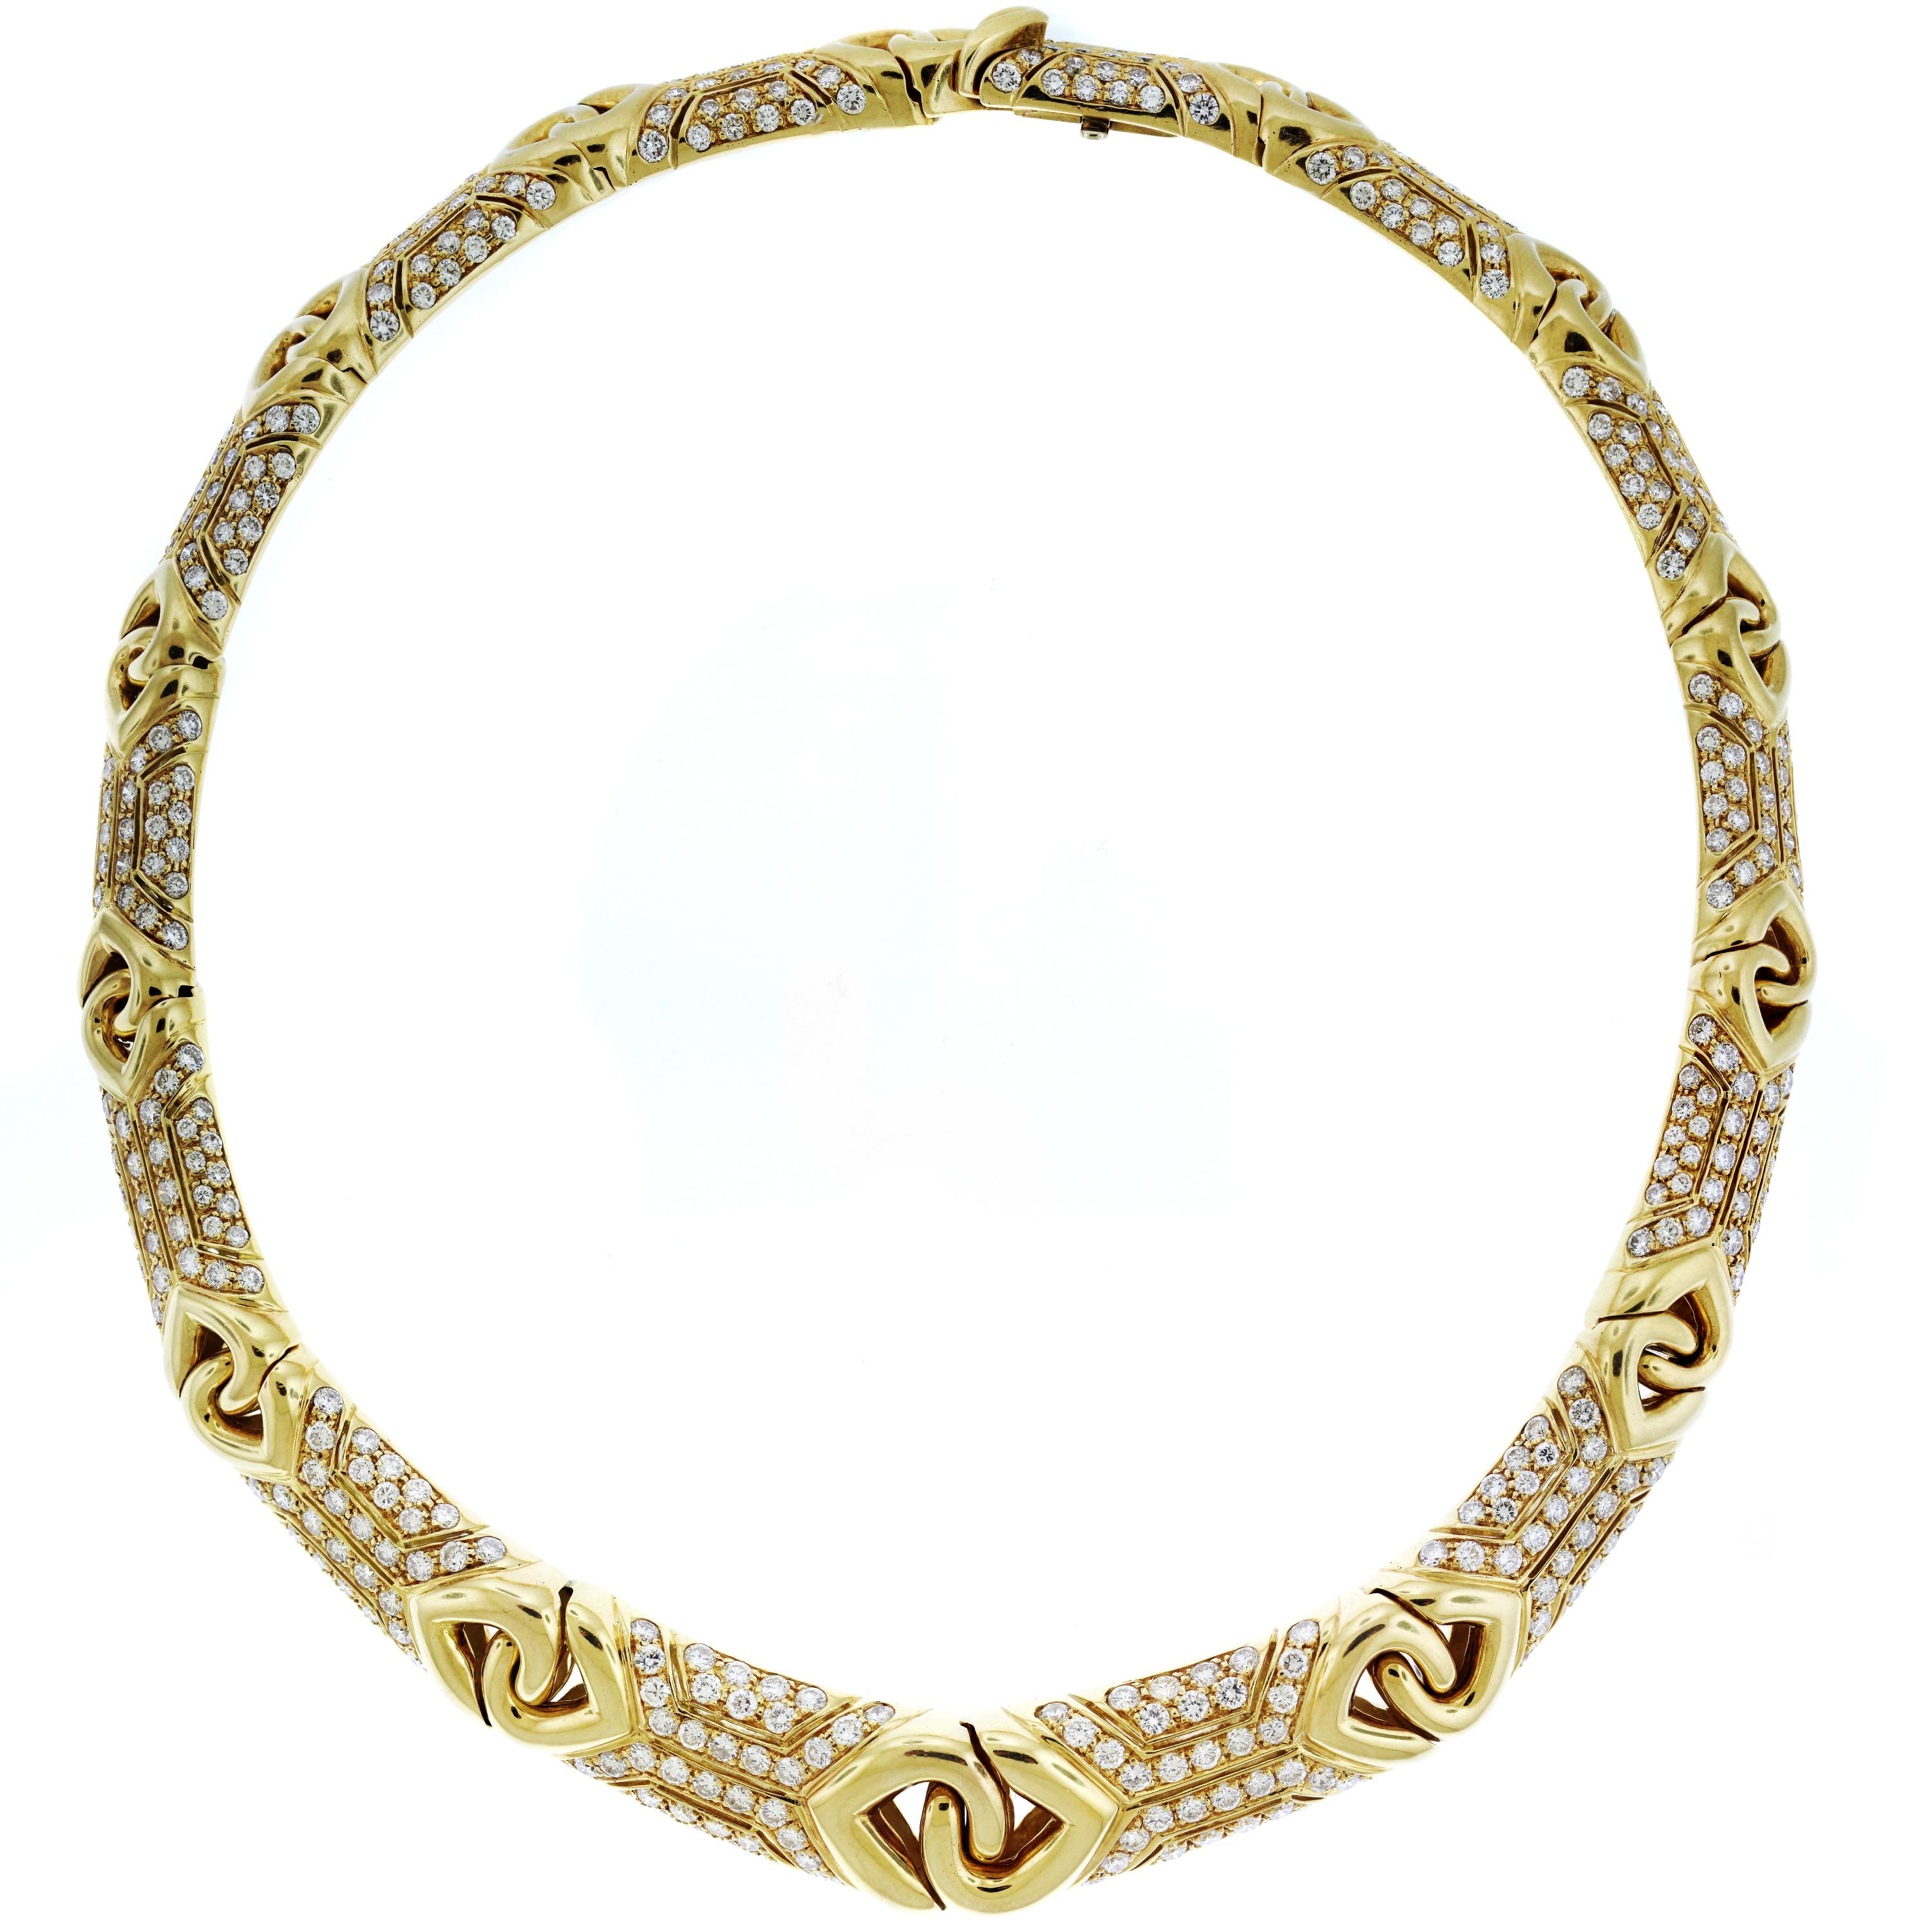 IF YOU ARE REALLY INTERESTED, CONTACT US WITH ANY REASONABLE OFFER. WE WILL TRY OUR BEST TO MAKE YOU HAPPY!

18K Yellow Gold and Diamond Necklace by Bulgari

1990's collar necklace by Bulgari, beautifully made with several rows of pave-set